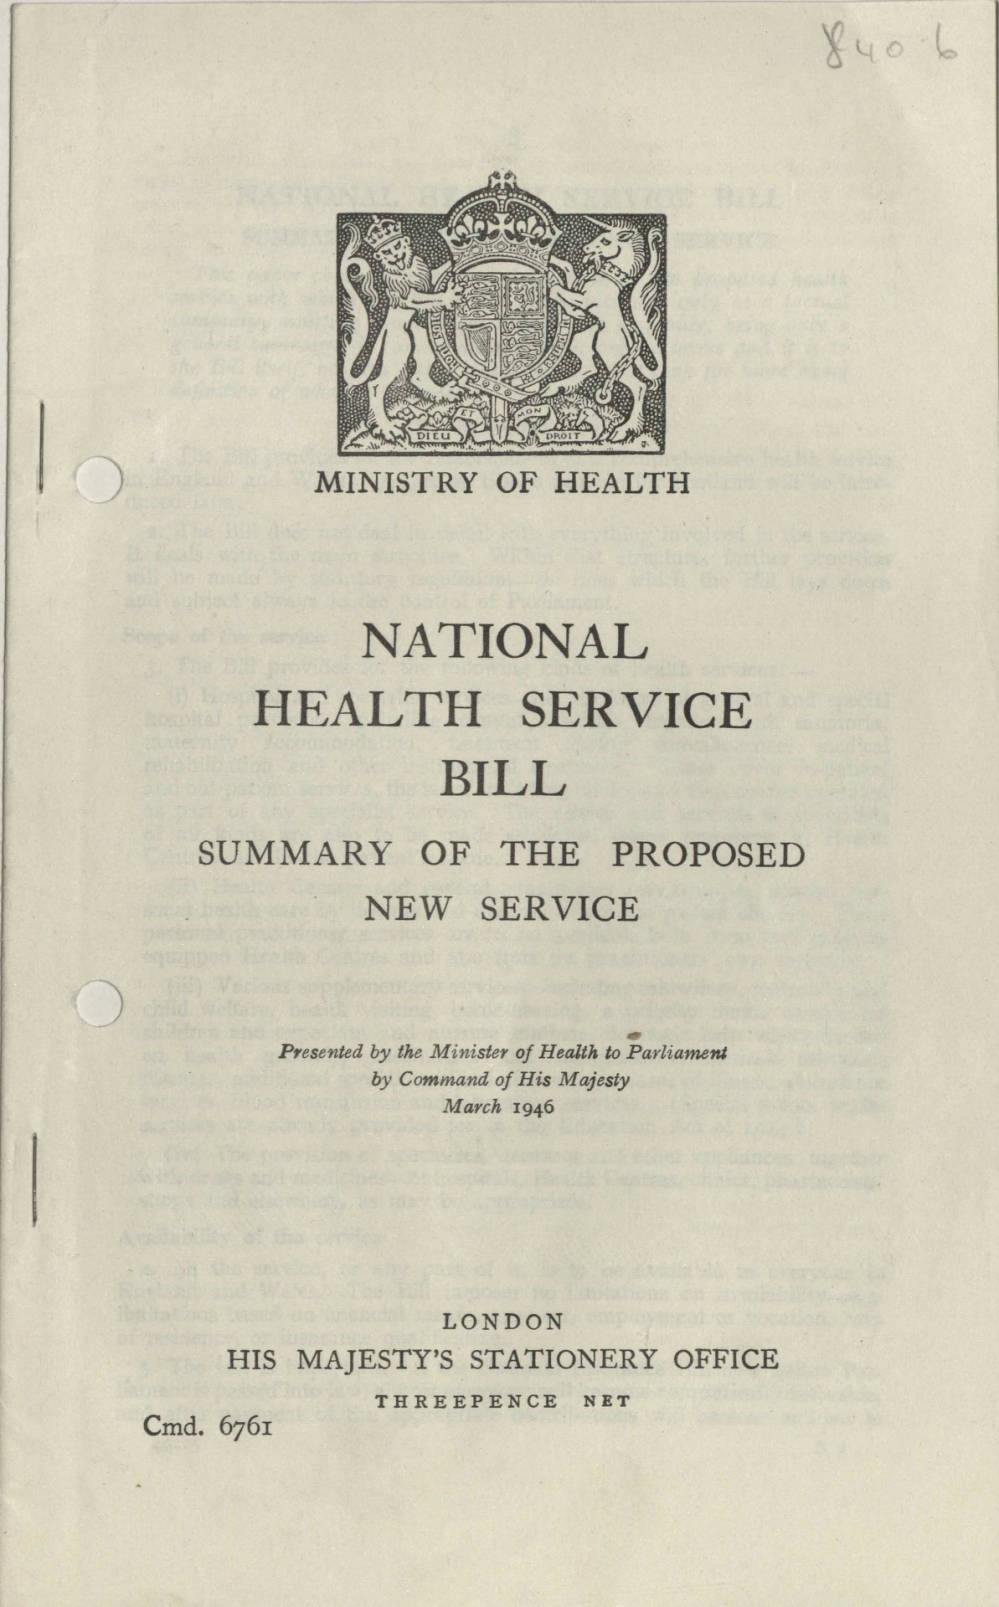 Photograph of a printed booklet. At the top there is a black and white image of a large bejeweled crown. To the left of the crown is a lion wearing a crown and to the right of the crown is a unicorn. Both animals are facing the larger crown in the middle. Under this image is text that reads, 'Ministry of Health'. Large text in the center reads 'National Health Service Bill'. Text below this reads 'Summary of the proposed new service'. Smaller text at the bottom reads 'London' and 'His majesty's stationary office' 